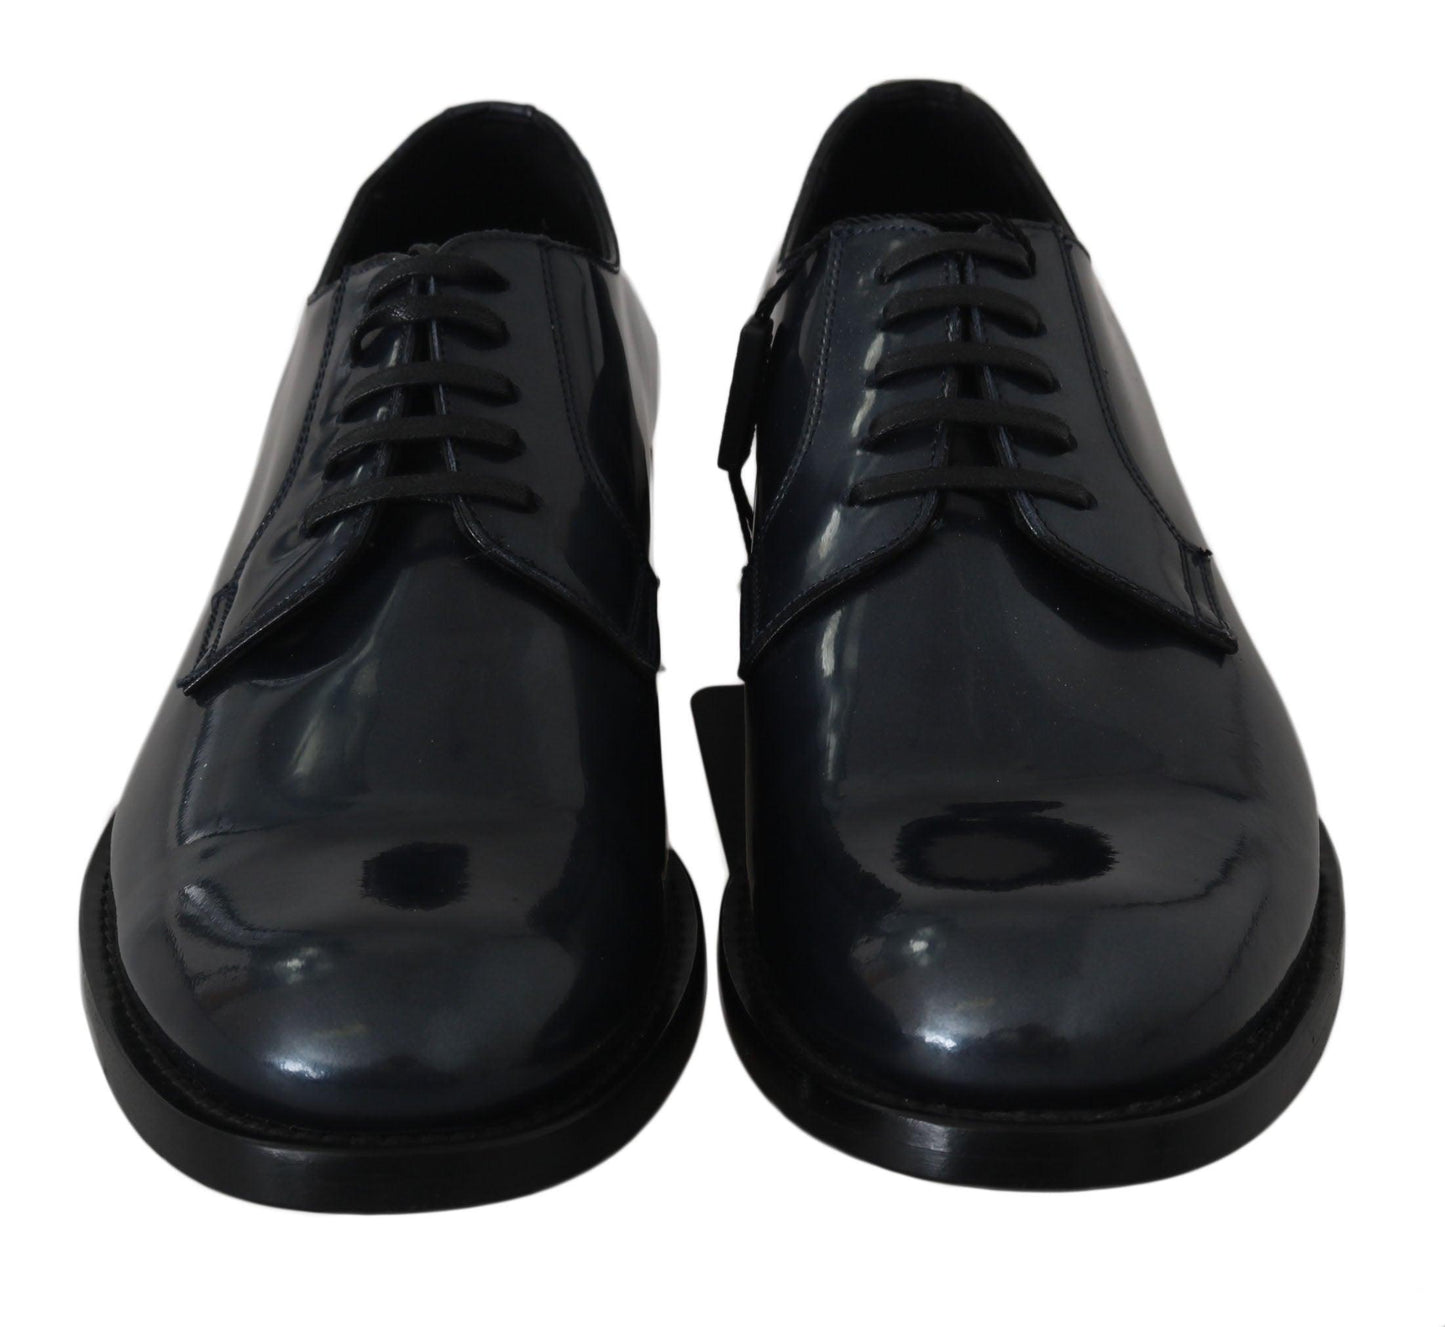 Blue Leather Derby Dress Formal Shoes - Designed by Dolce & Gabbana Available to Buy at a Discounted Price on Moon Behind The Hill Online Designer Discount Store